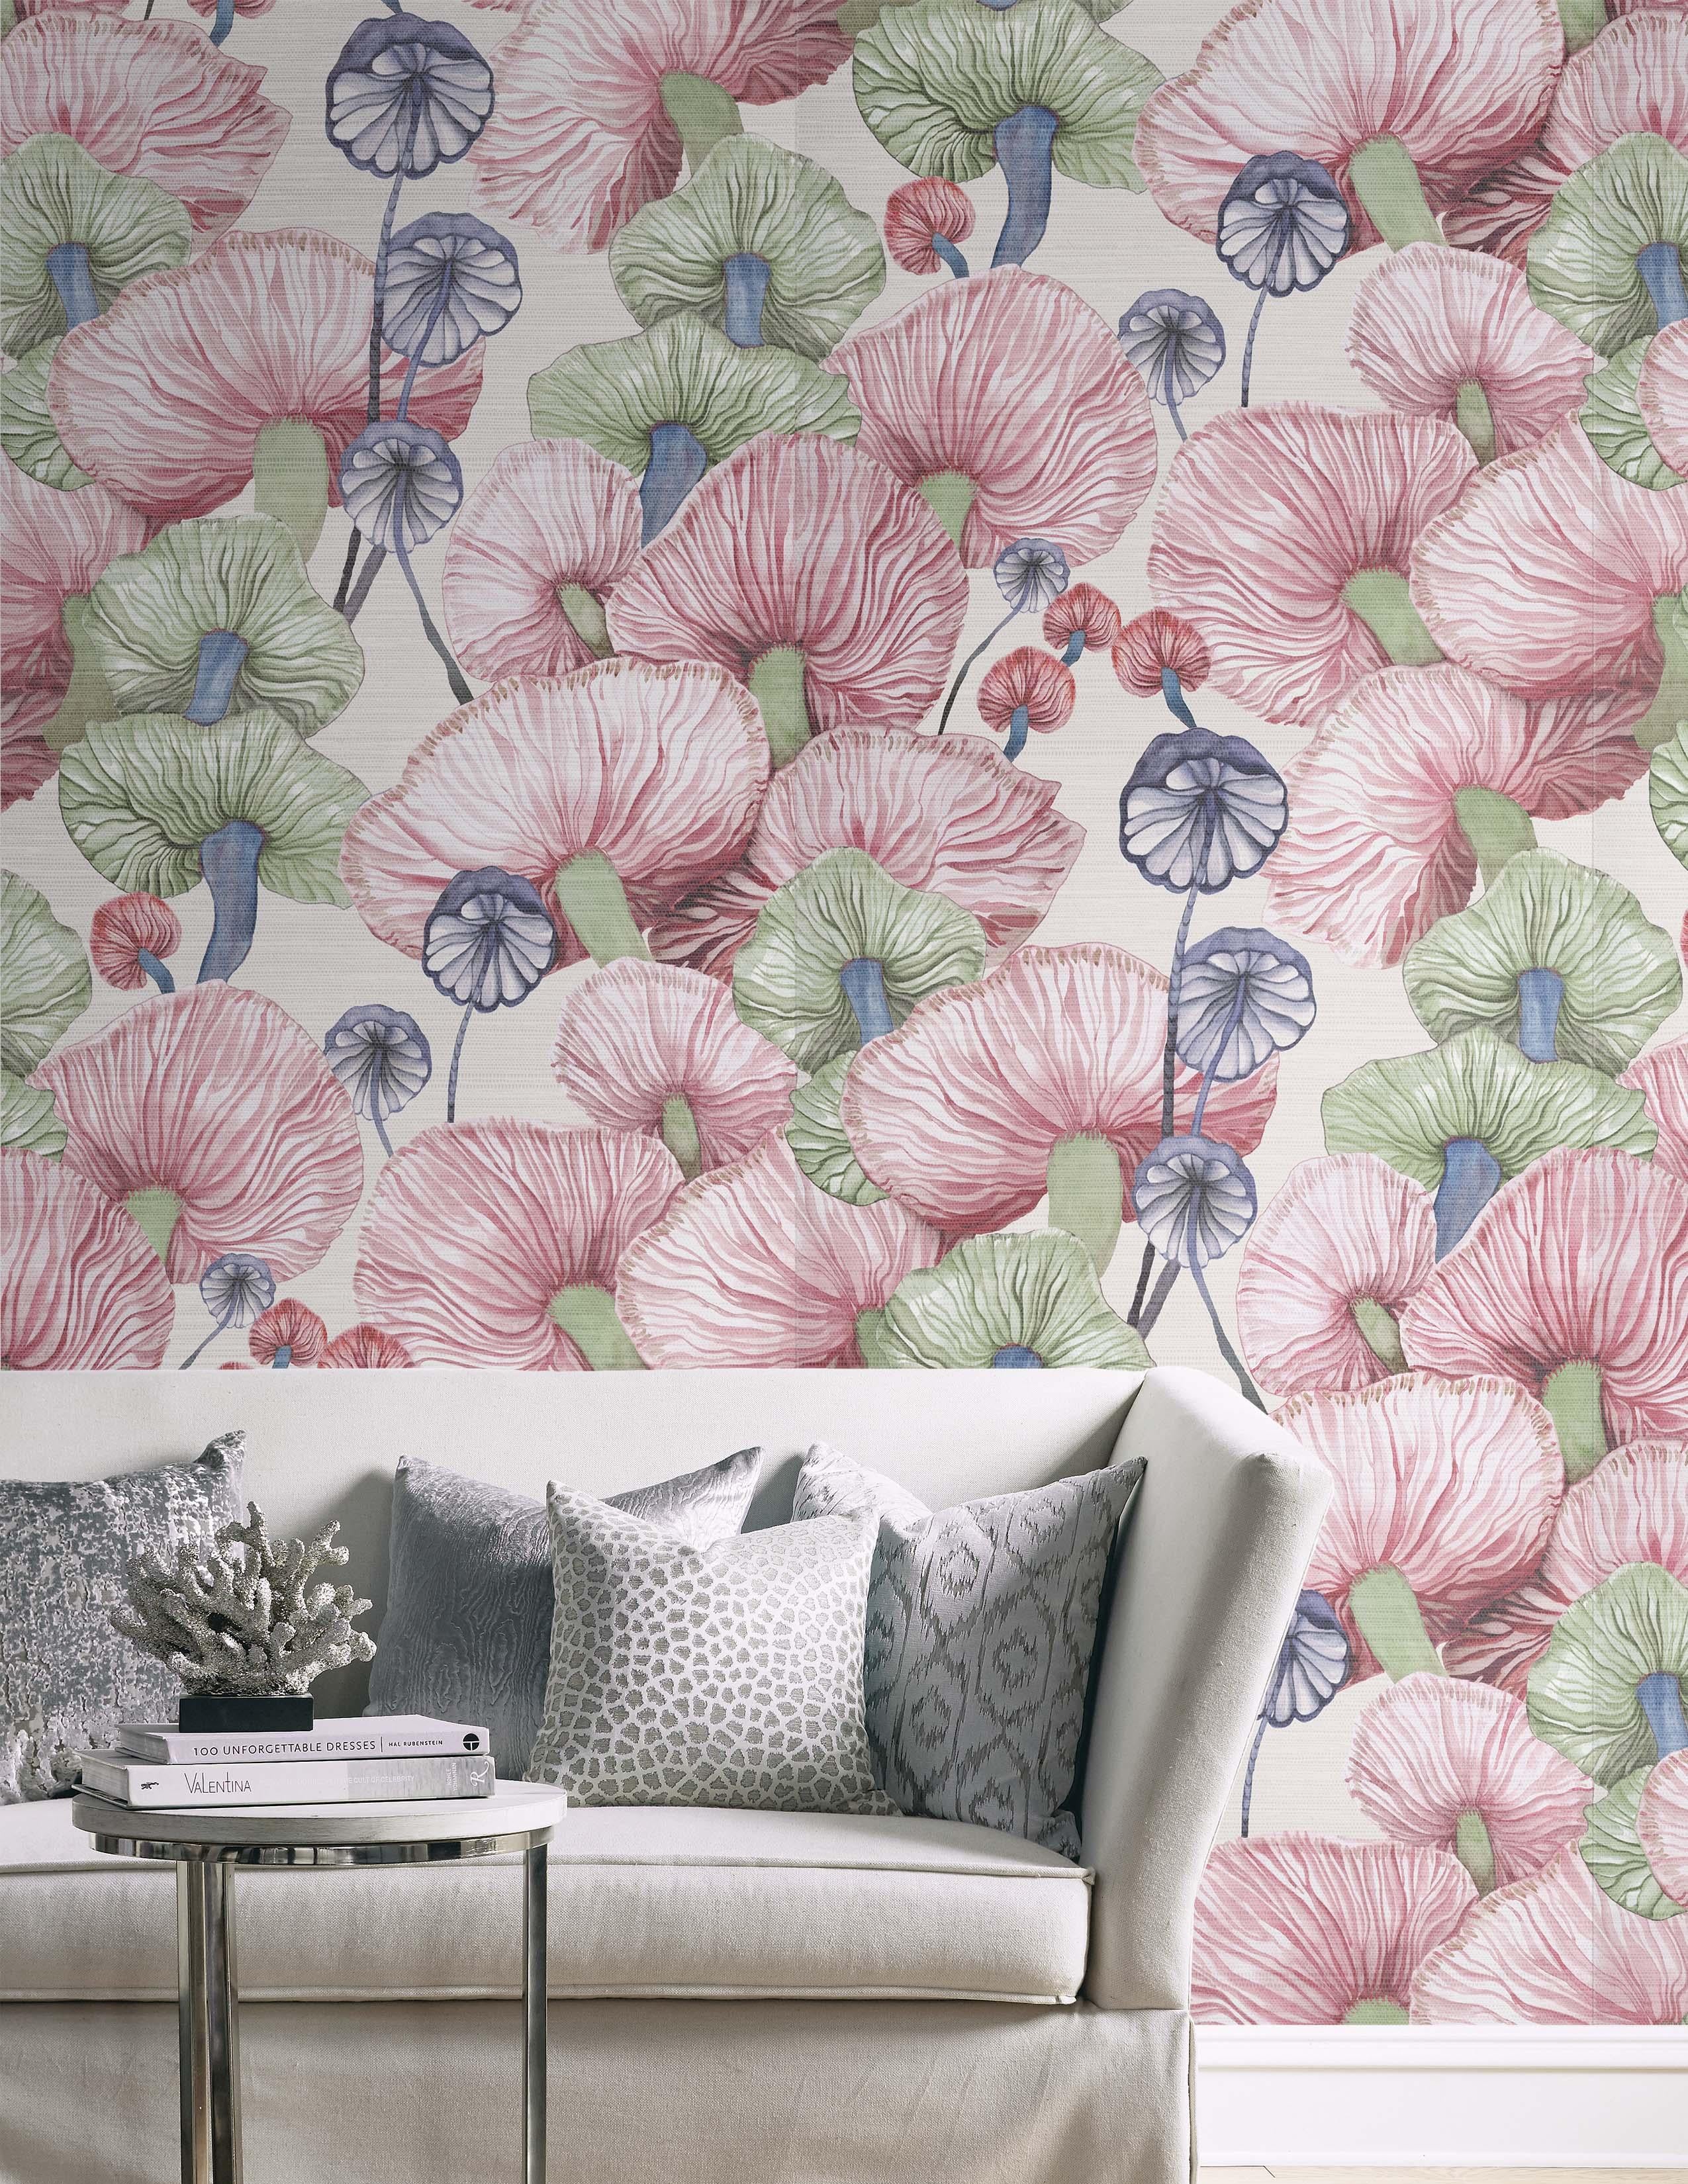 Moisseron is an enchanting digital print on shimmering grasscloth which features watercolor brushstrokes of mushrooms that result in an endlessly fascinating repeat. 

Milady - pink, green, lavender and cream

All of our non-woven papers are